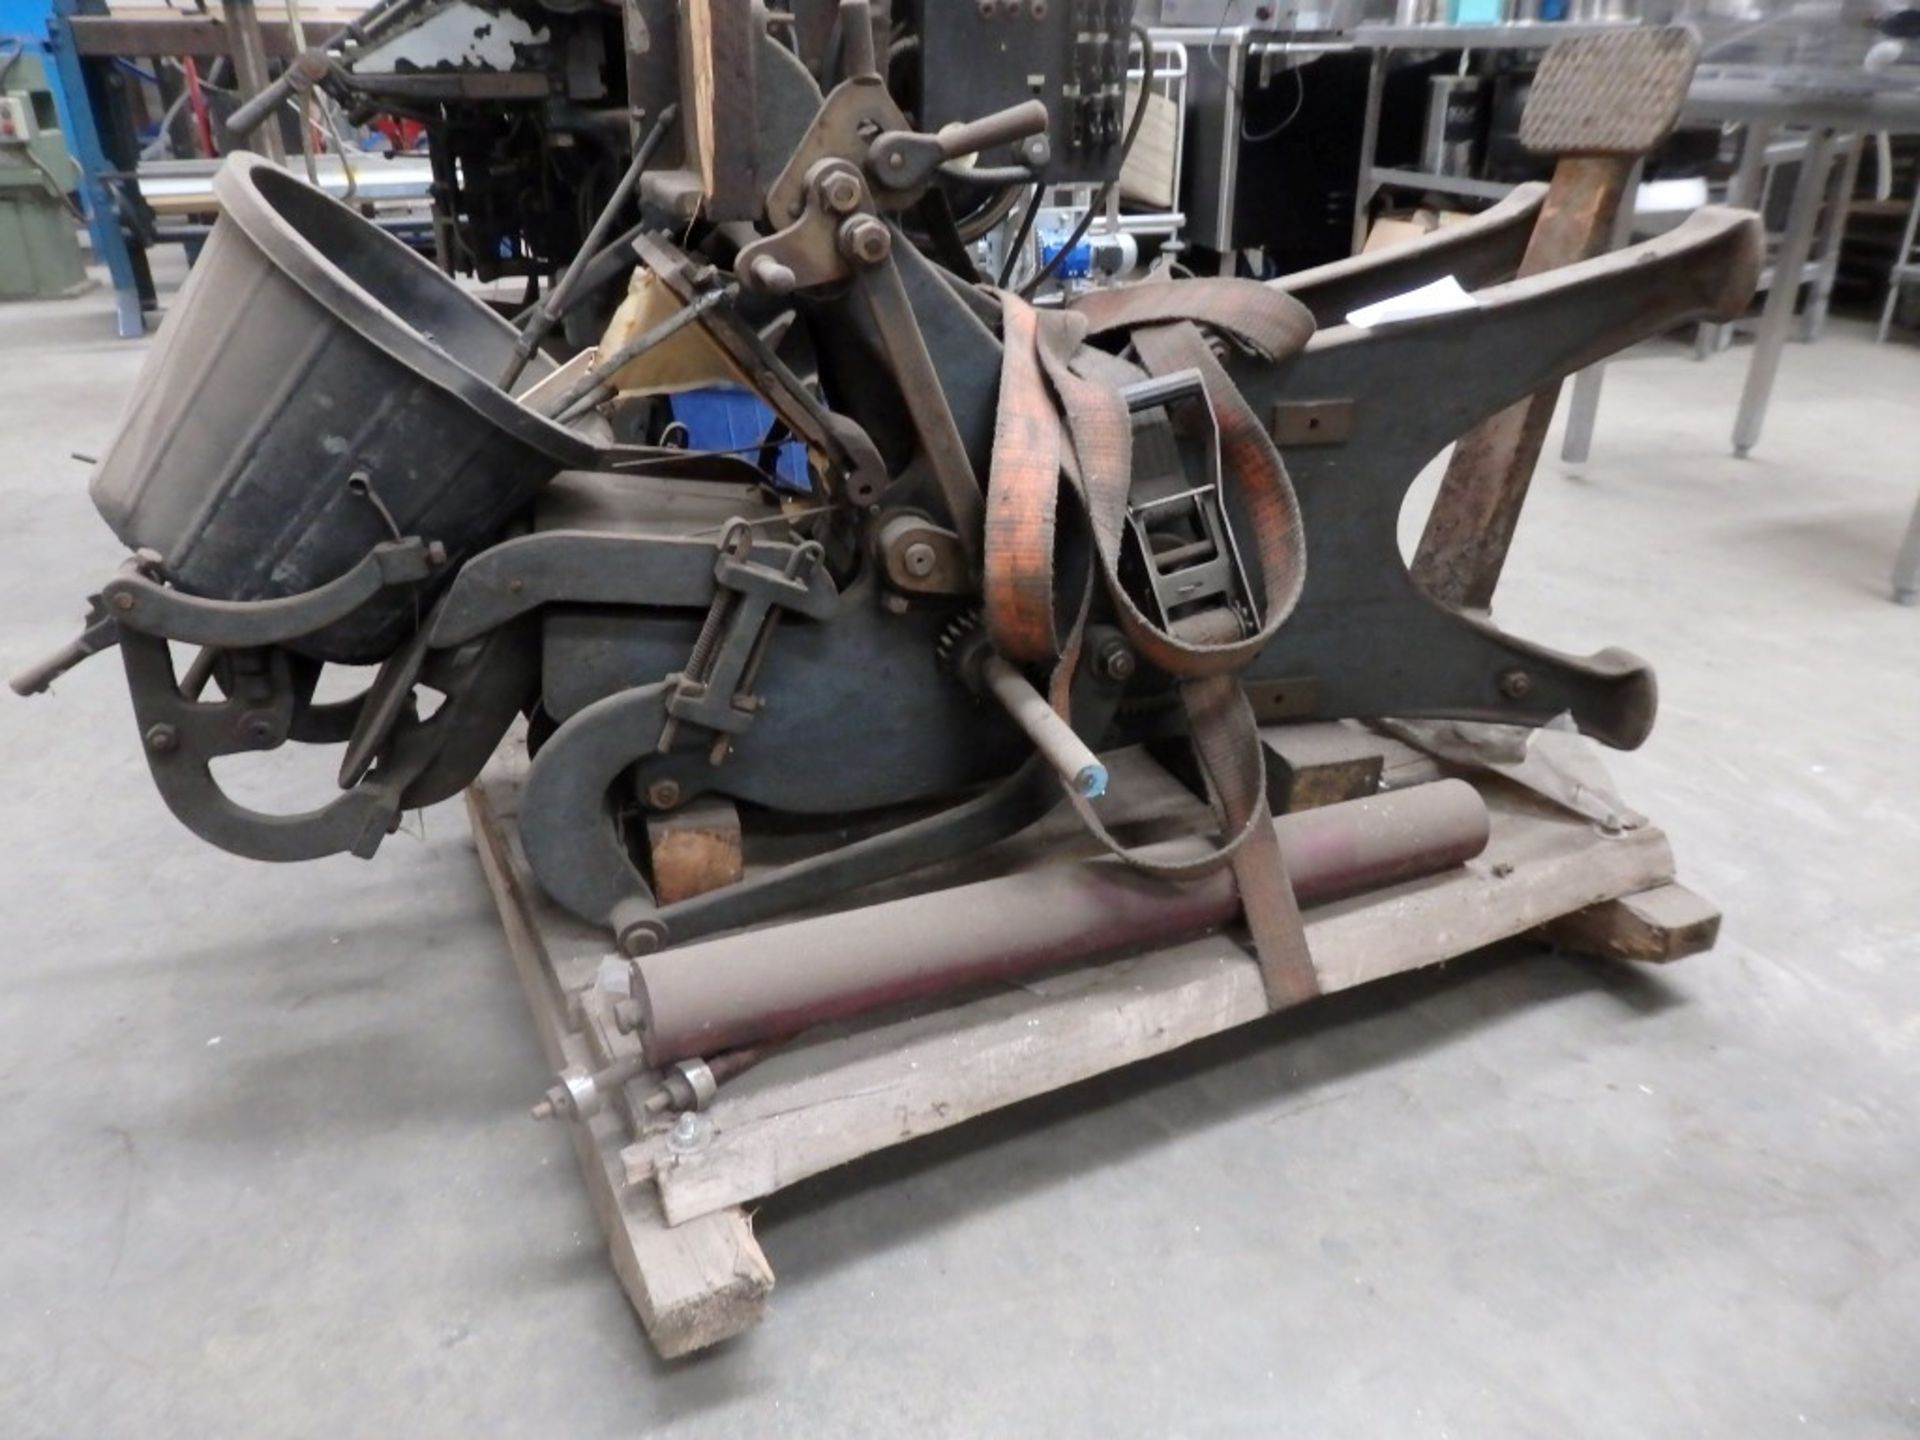 1 x Original Linotype Model 78 Printing Press - Untested In Good Aesthetic Condition - Fantastic - Image 10 of 23